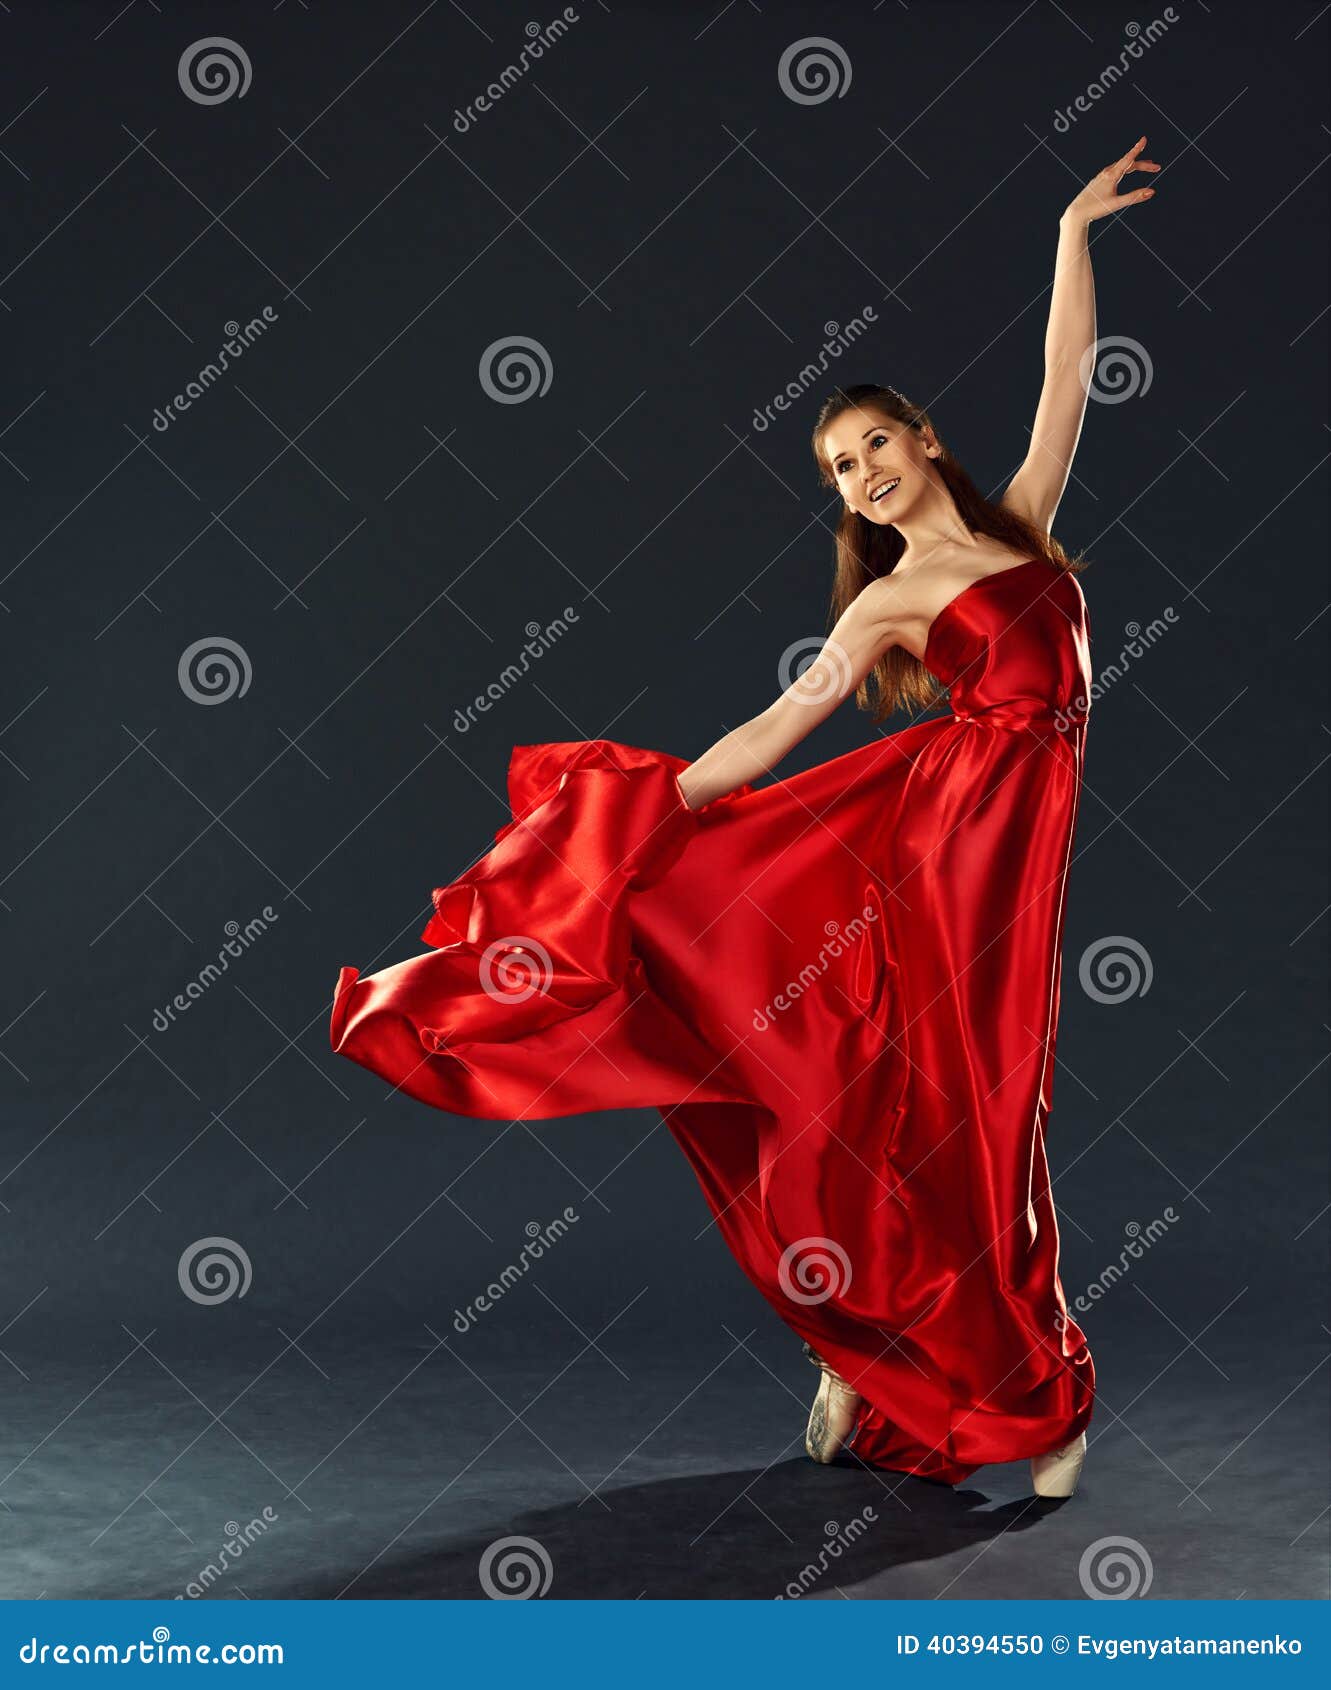 Girl in red dress dancing traditional dance Vector Image